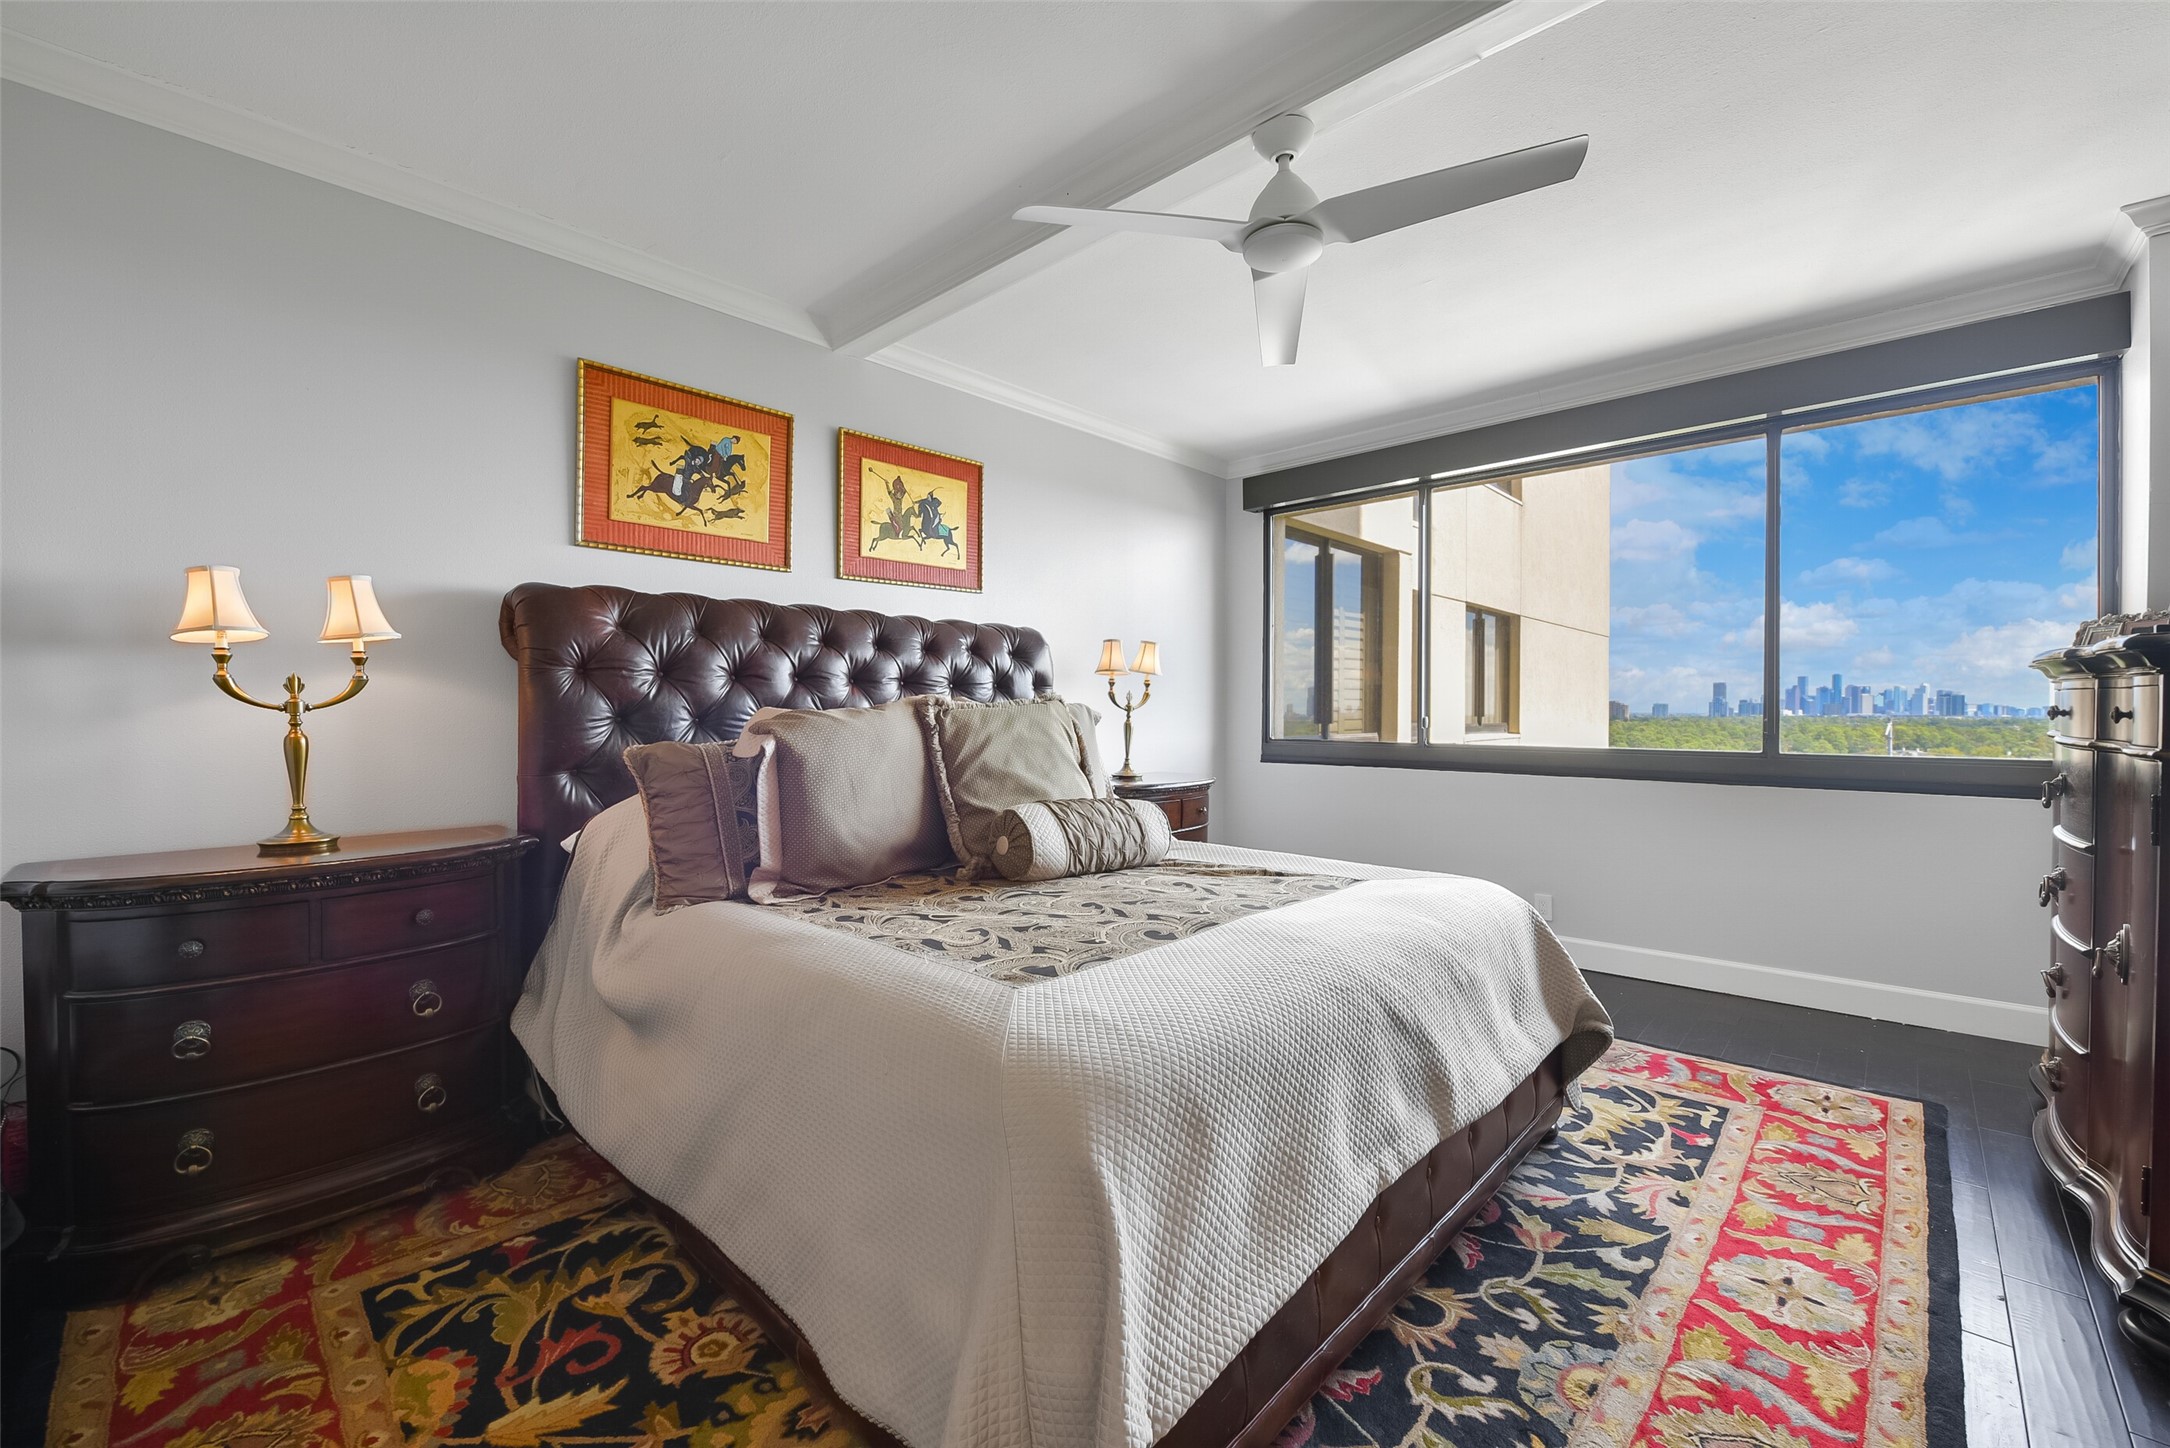 Retreat to the primary bedroom, featuring a large picture window framing stunning sunrise views of downtown and Memorial Park.